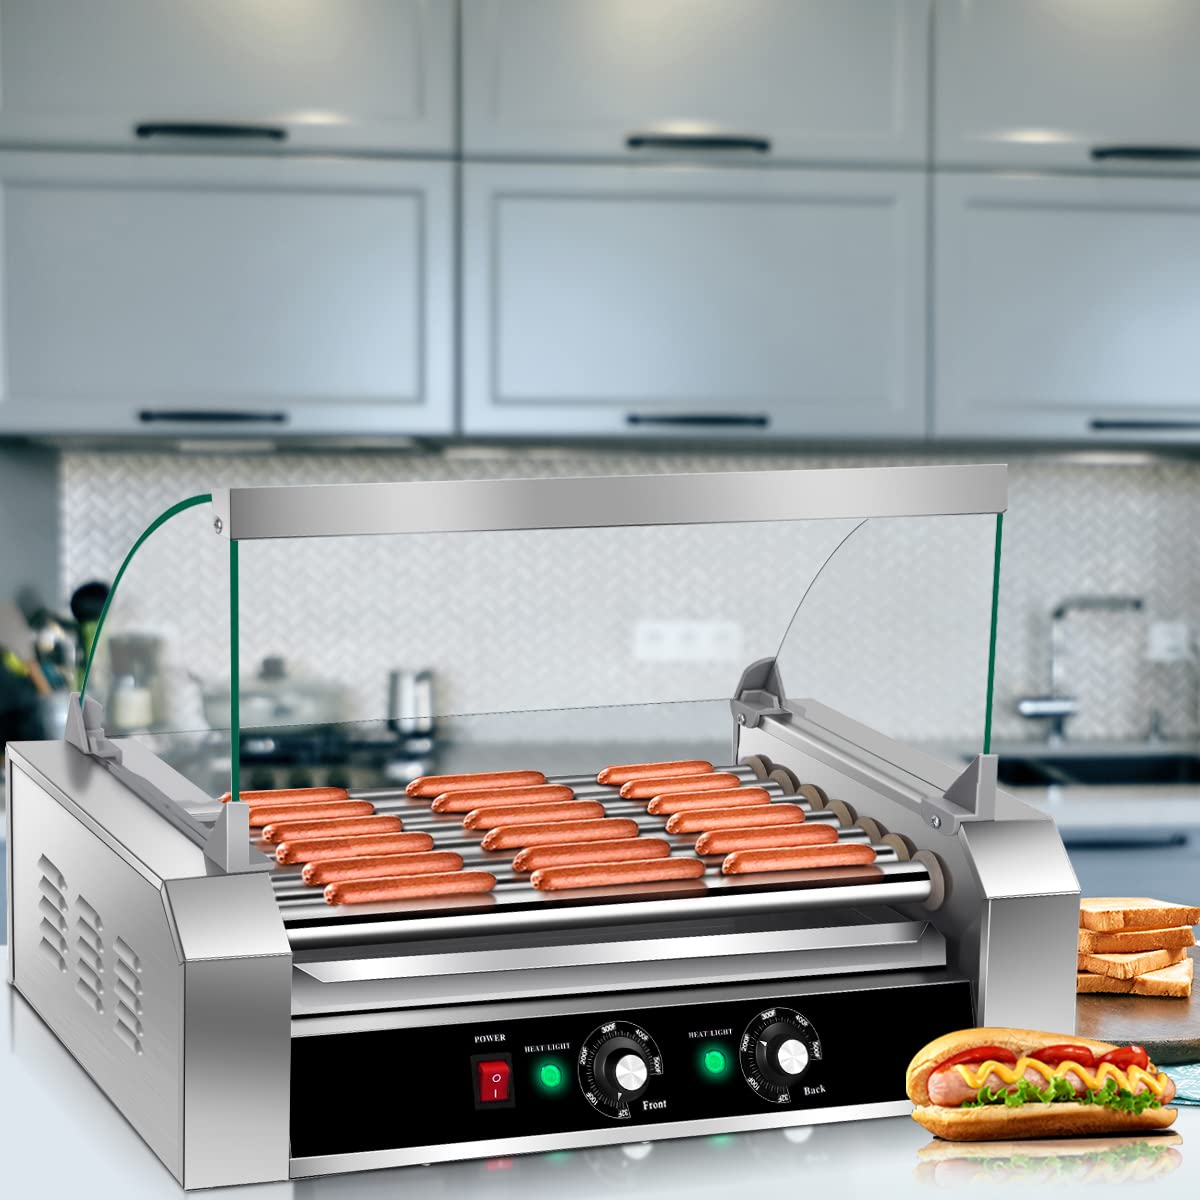 Giantex 7 Non-Stick Rollers 18 Hot Dog Sausage Grill Cooker Machine with Removable Stainless Steel Drip Tray and Glass Hood Cover